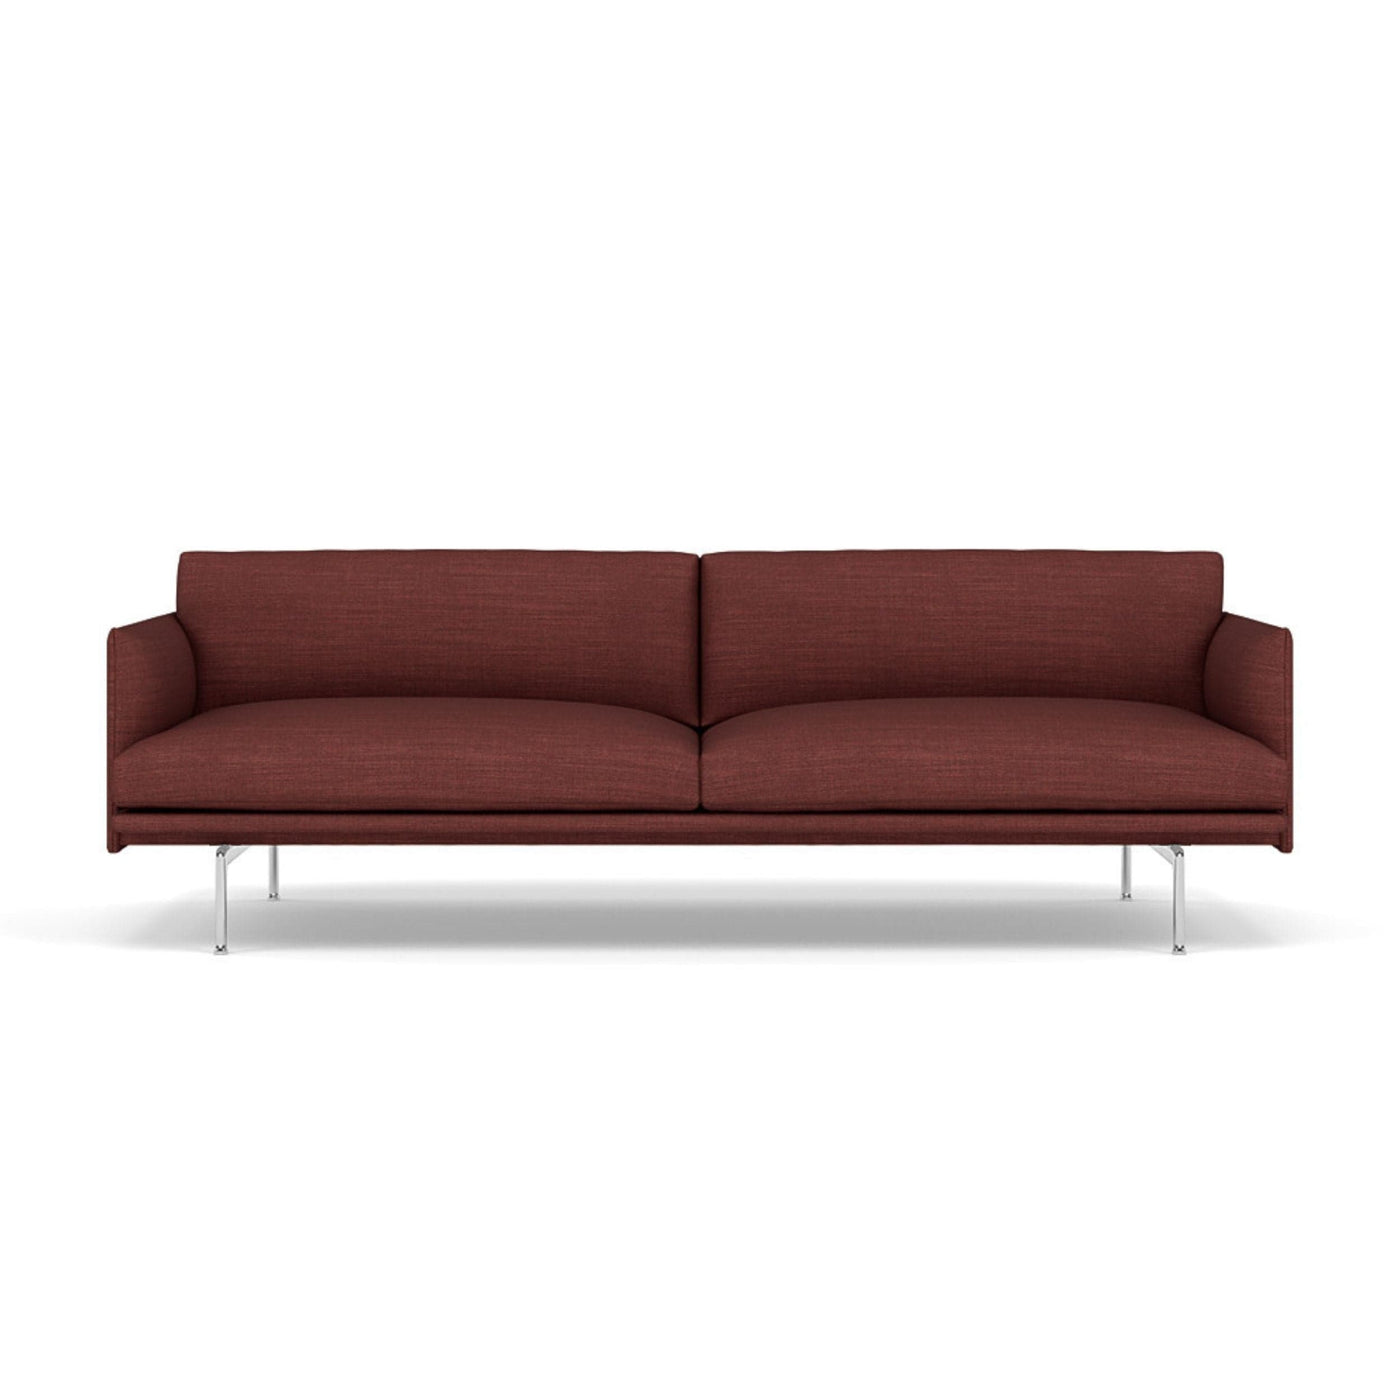 Muuto outline 3 seater sofa with polished aluminium legs. Made to order from someday designs. #colour_canvas-576-red